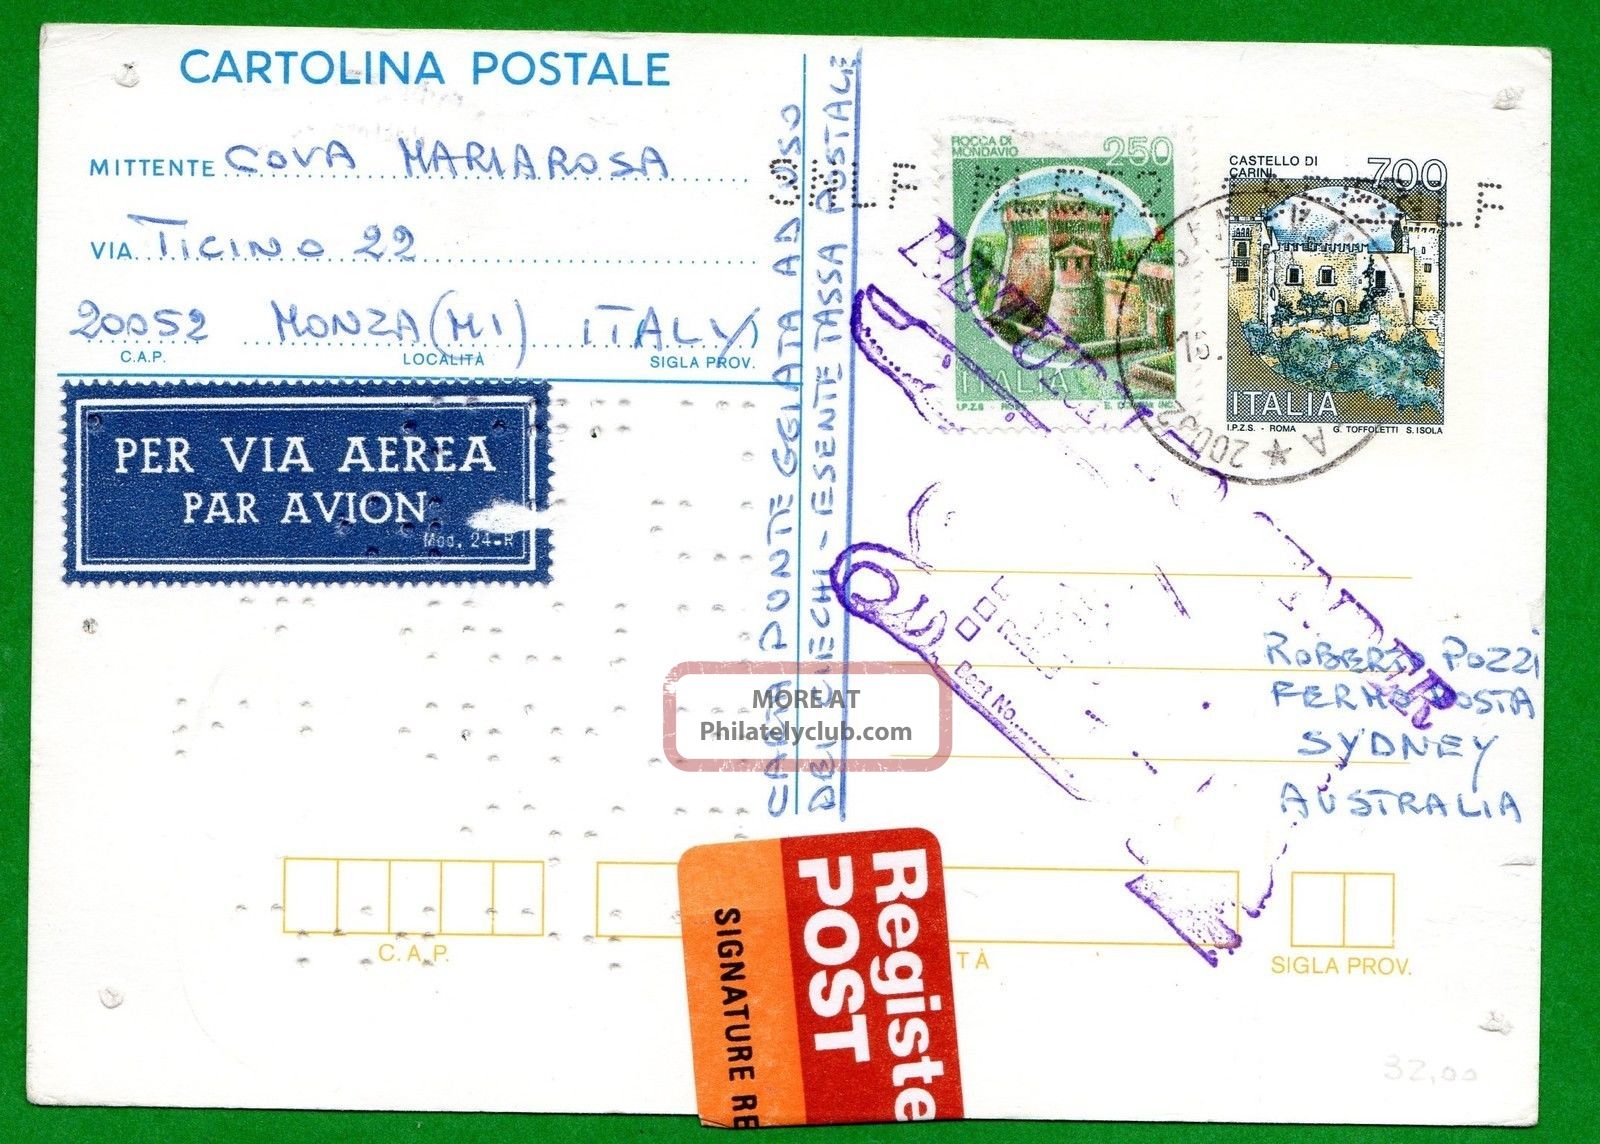 Italy - Postal Stationery In Braille With 250 Lire Castles 16 - 1 - 2001 Monza (mb) Europe photo